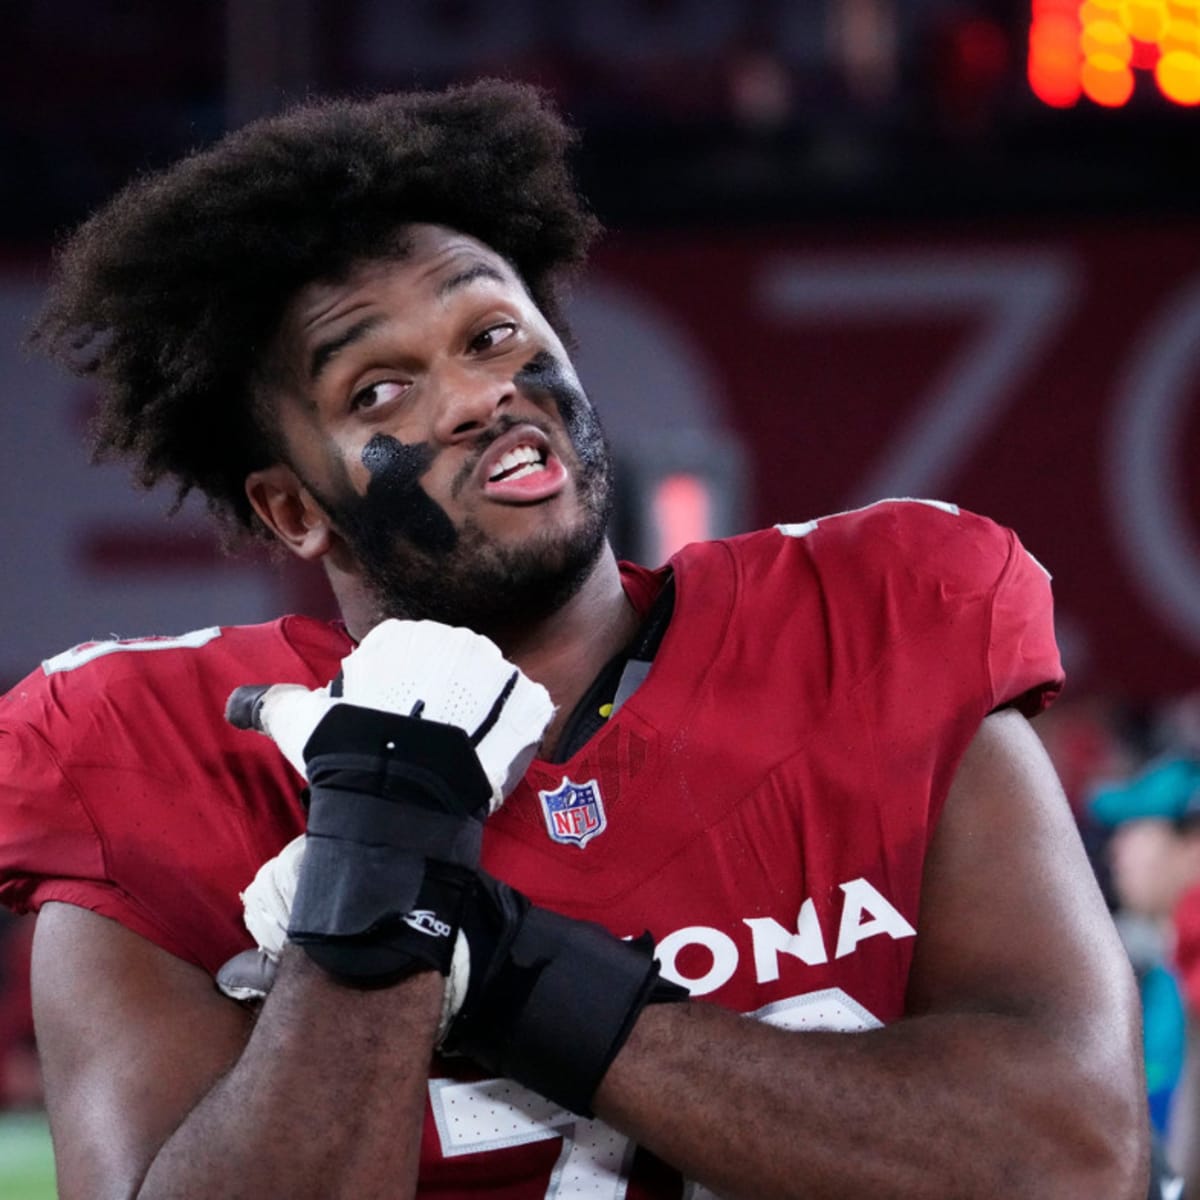 Arizona Cardinals post meme mocking Russell Wilson after win over